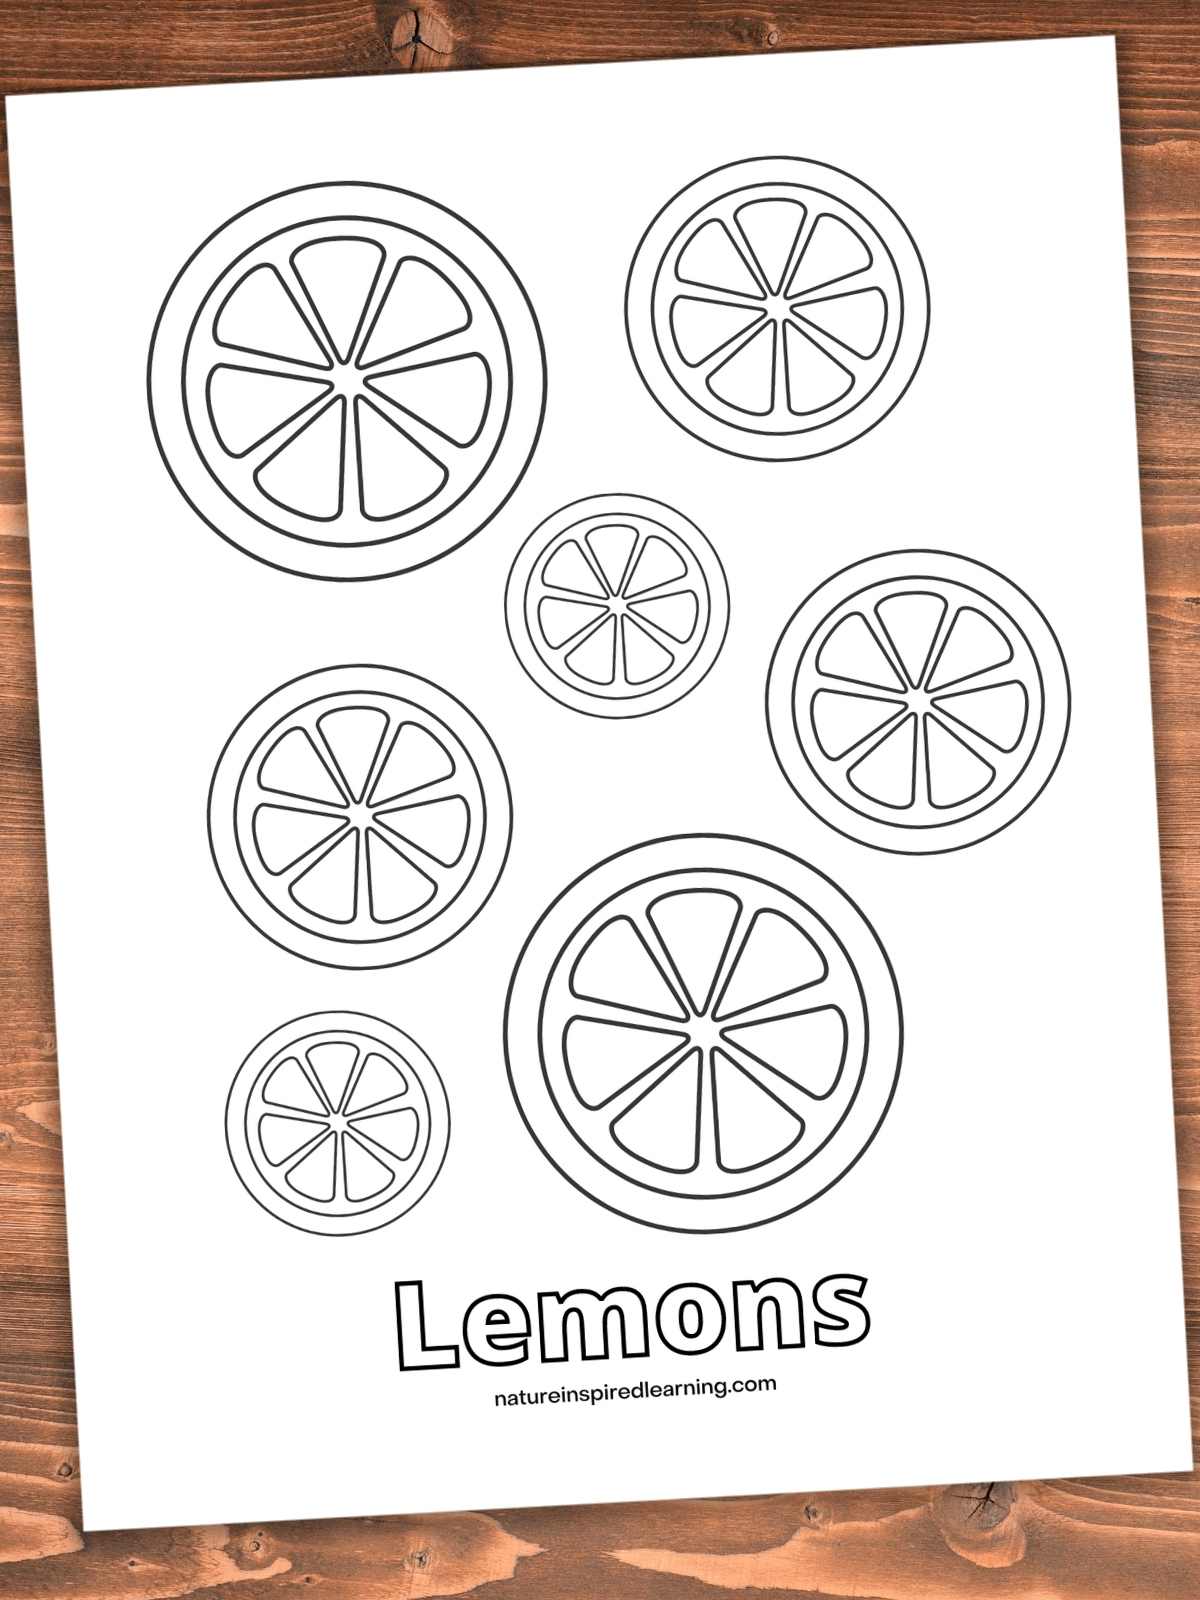 printable with circular lemon slices and word Lemon across bottom. Sheet on a wooden background